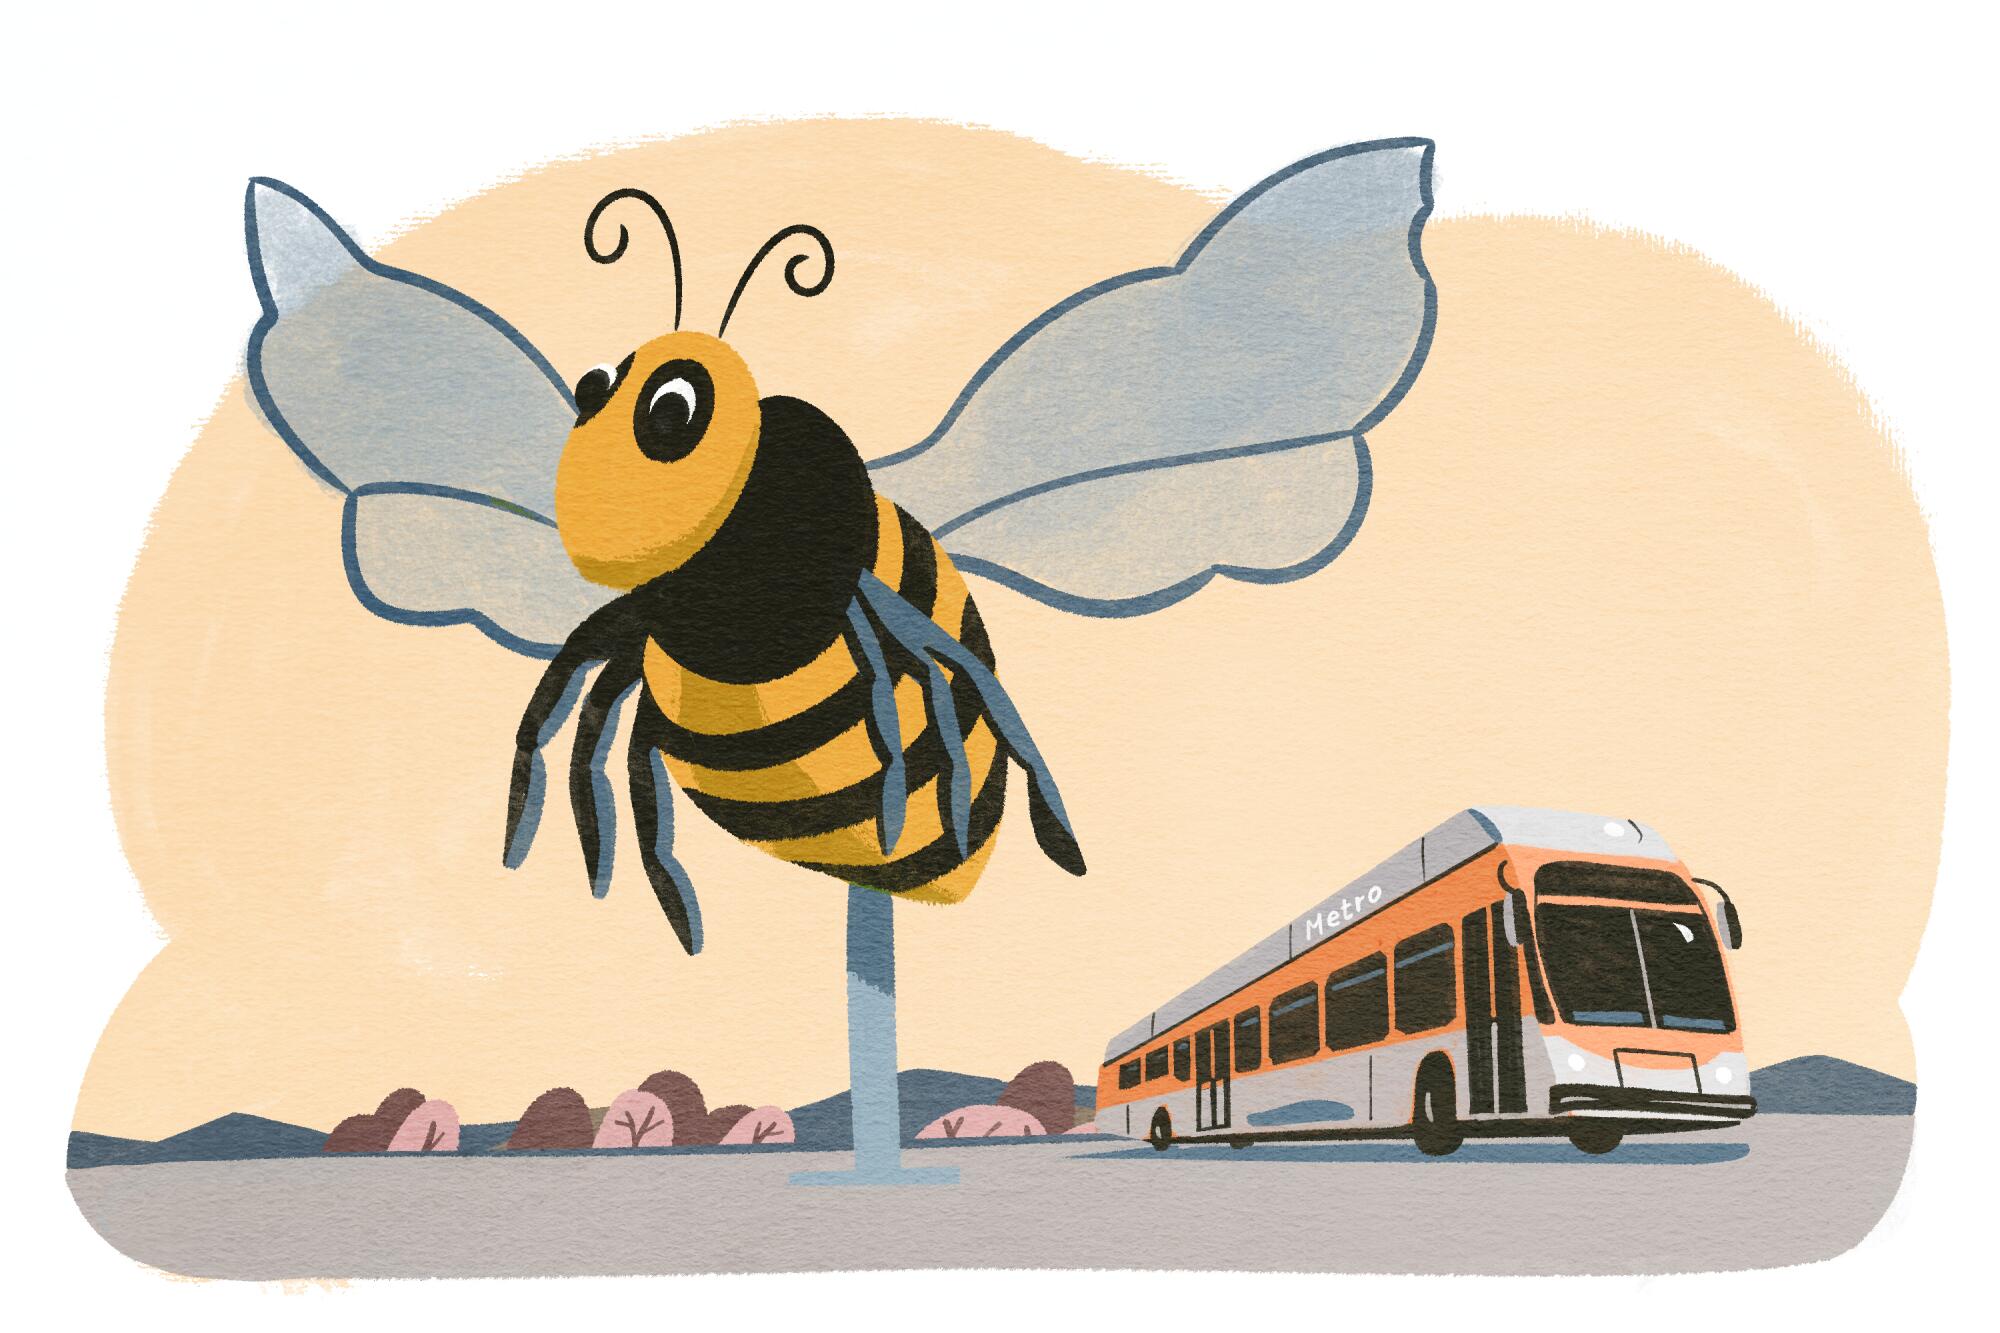 illustration of a city bus driving past a giant bumblebee sculpture